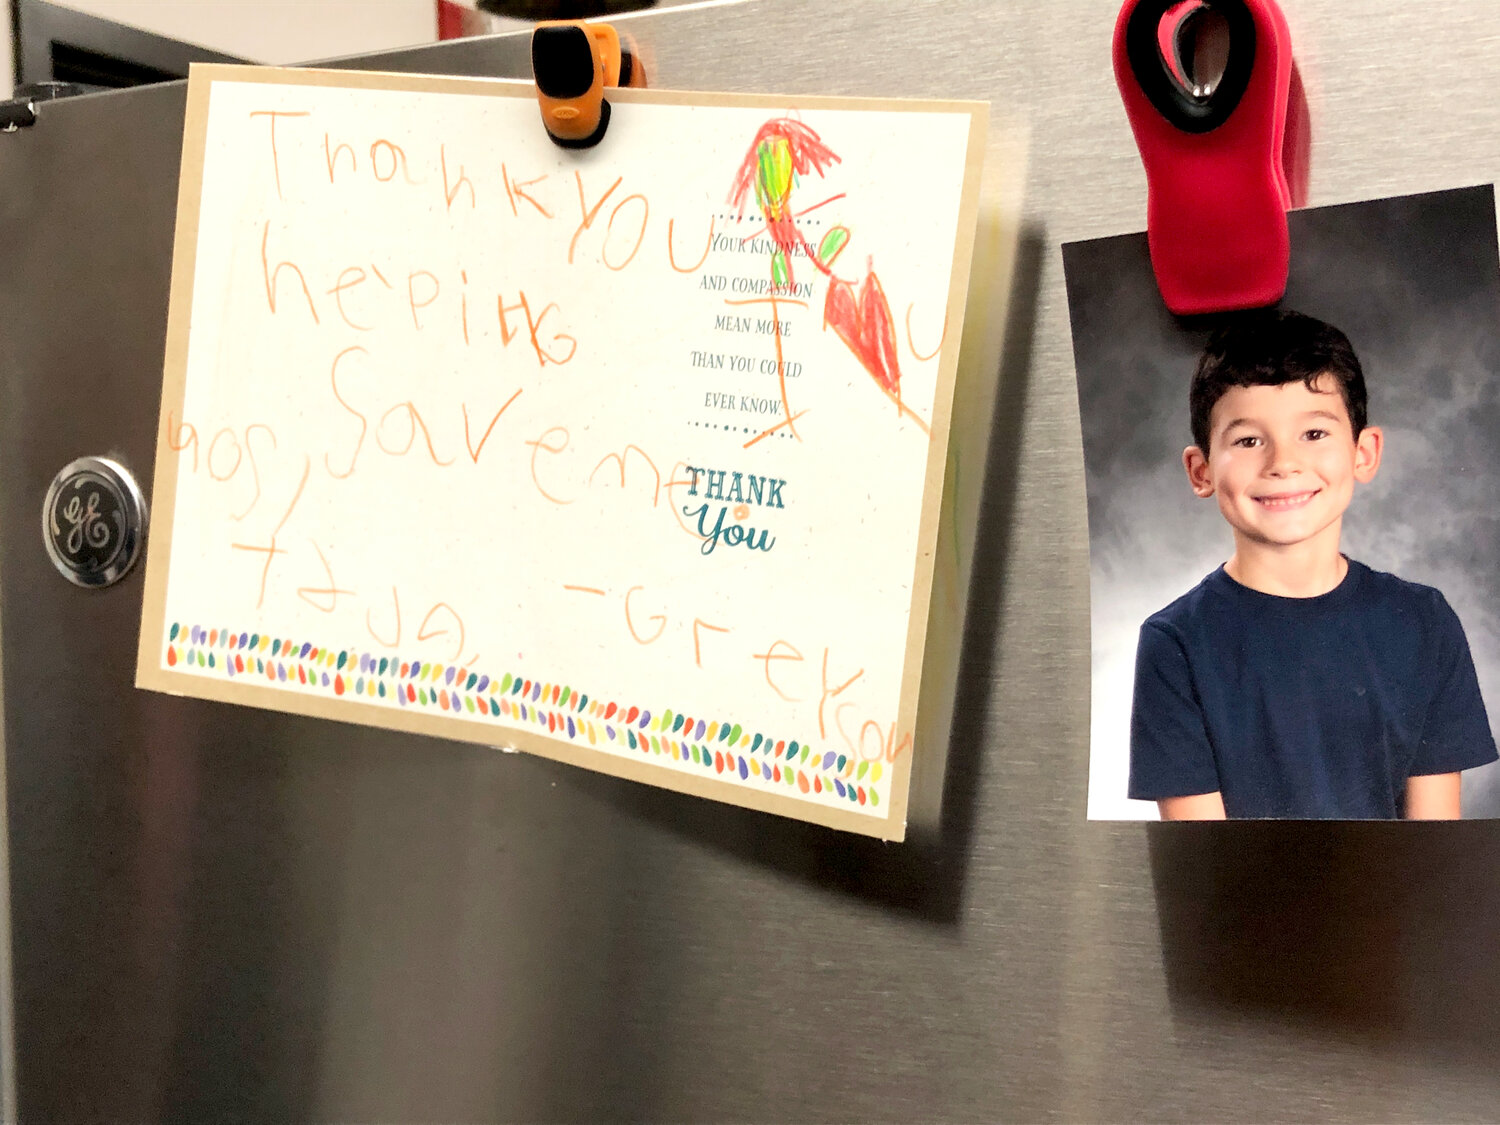 Greyson’s thank you note and photo are the only things on the fridge at the Home fire station.